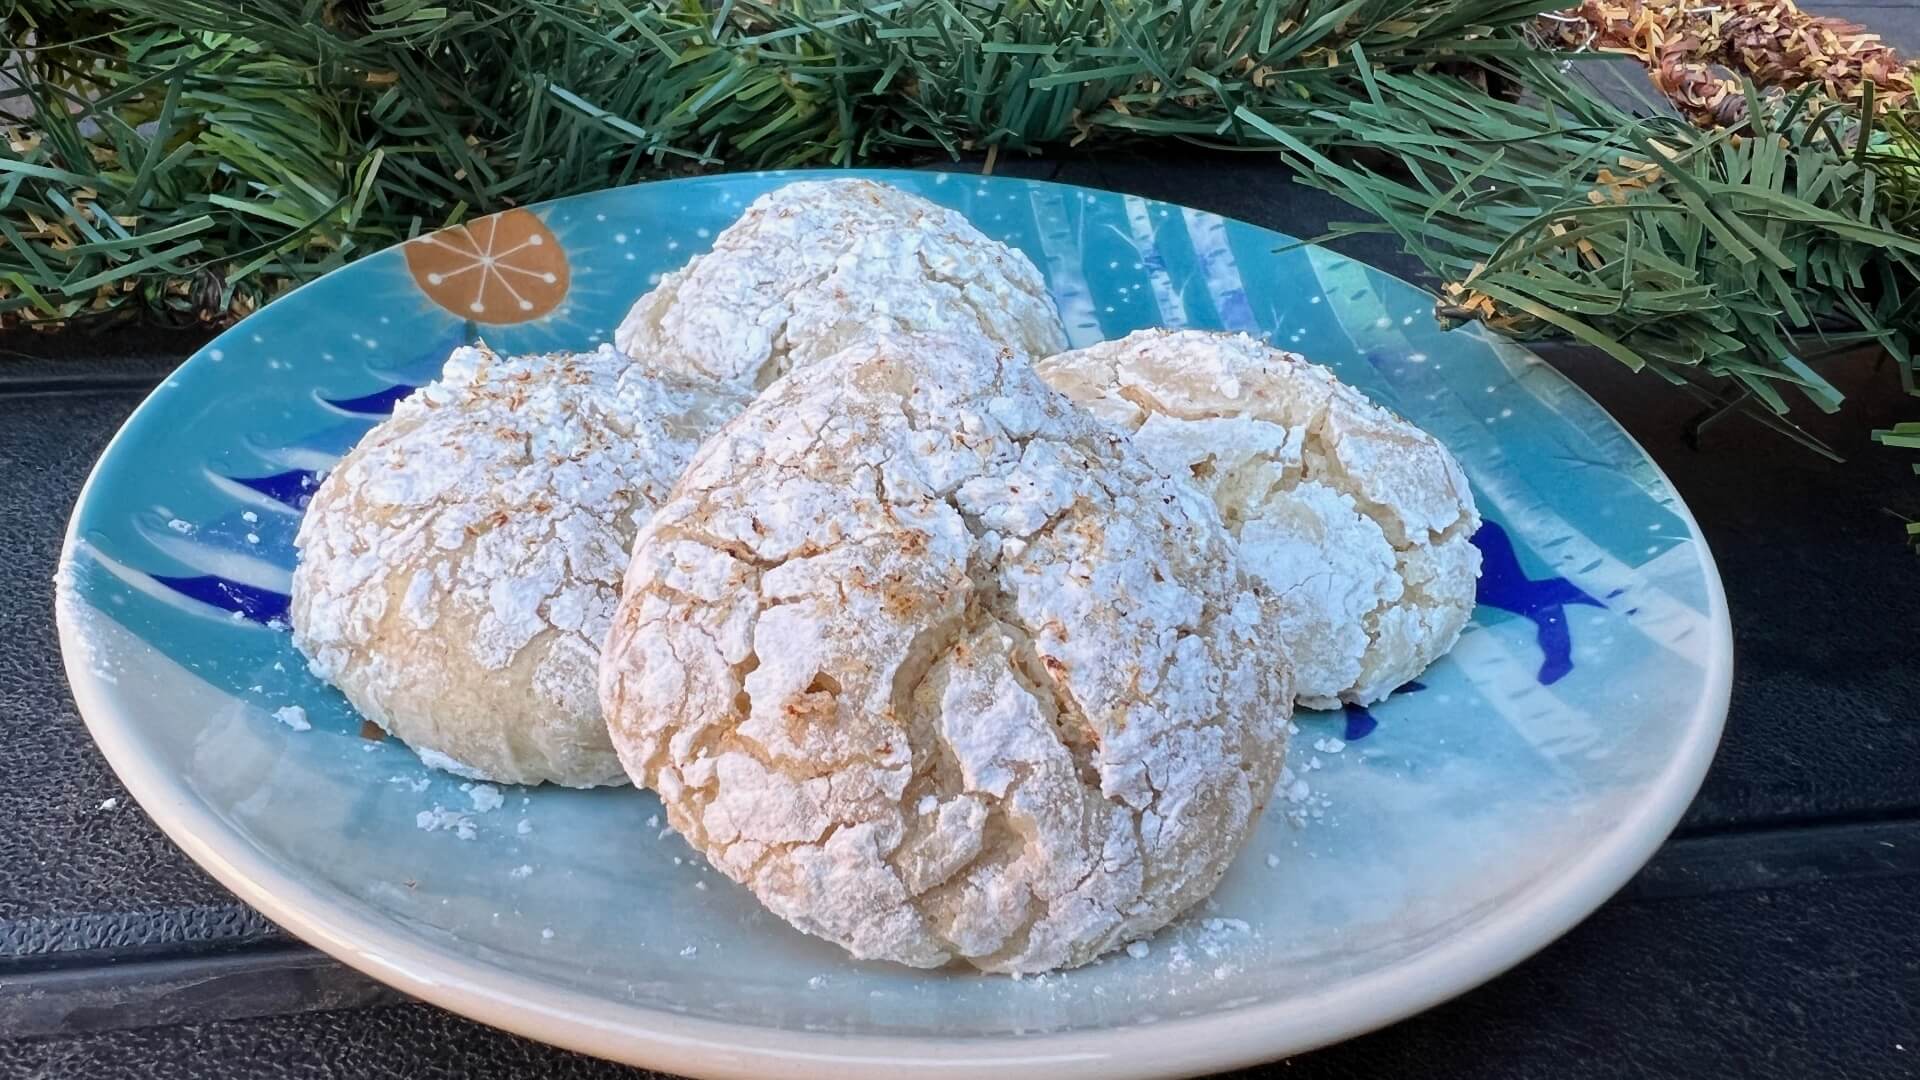 Round cookies baked in powdered sugar with crackles on the top, on a blue plate with pine garland in the background.